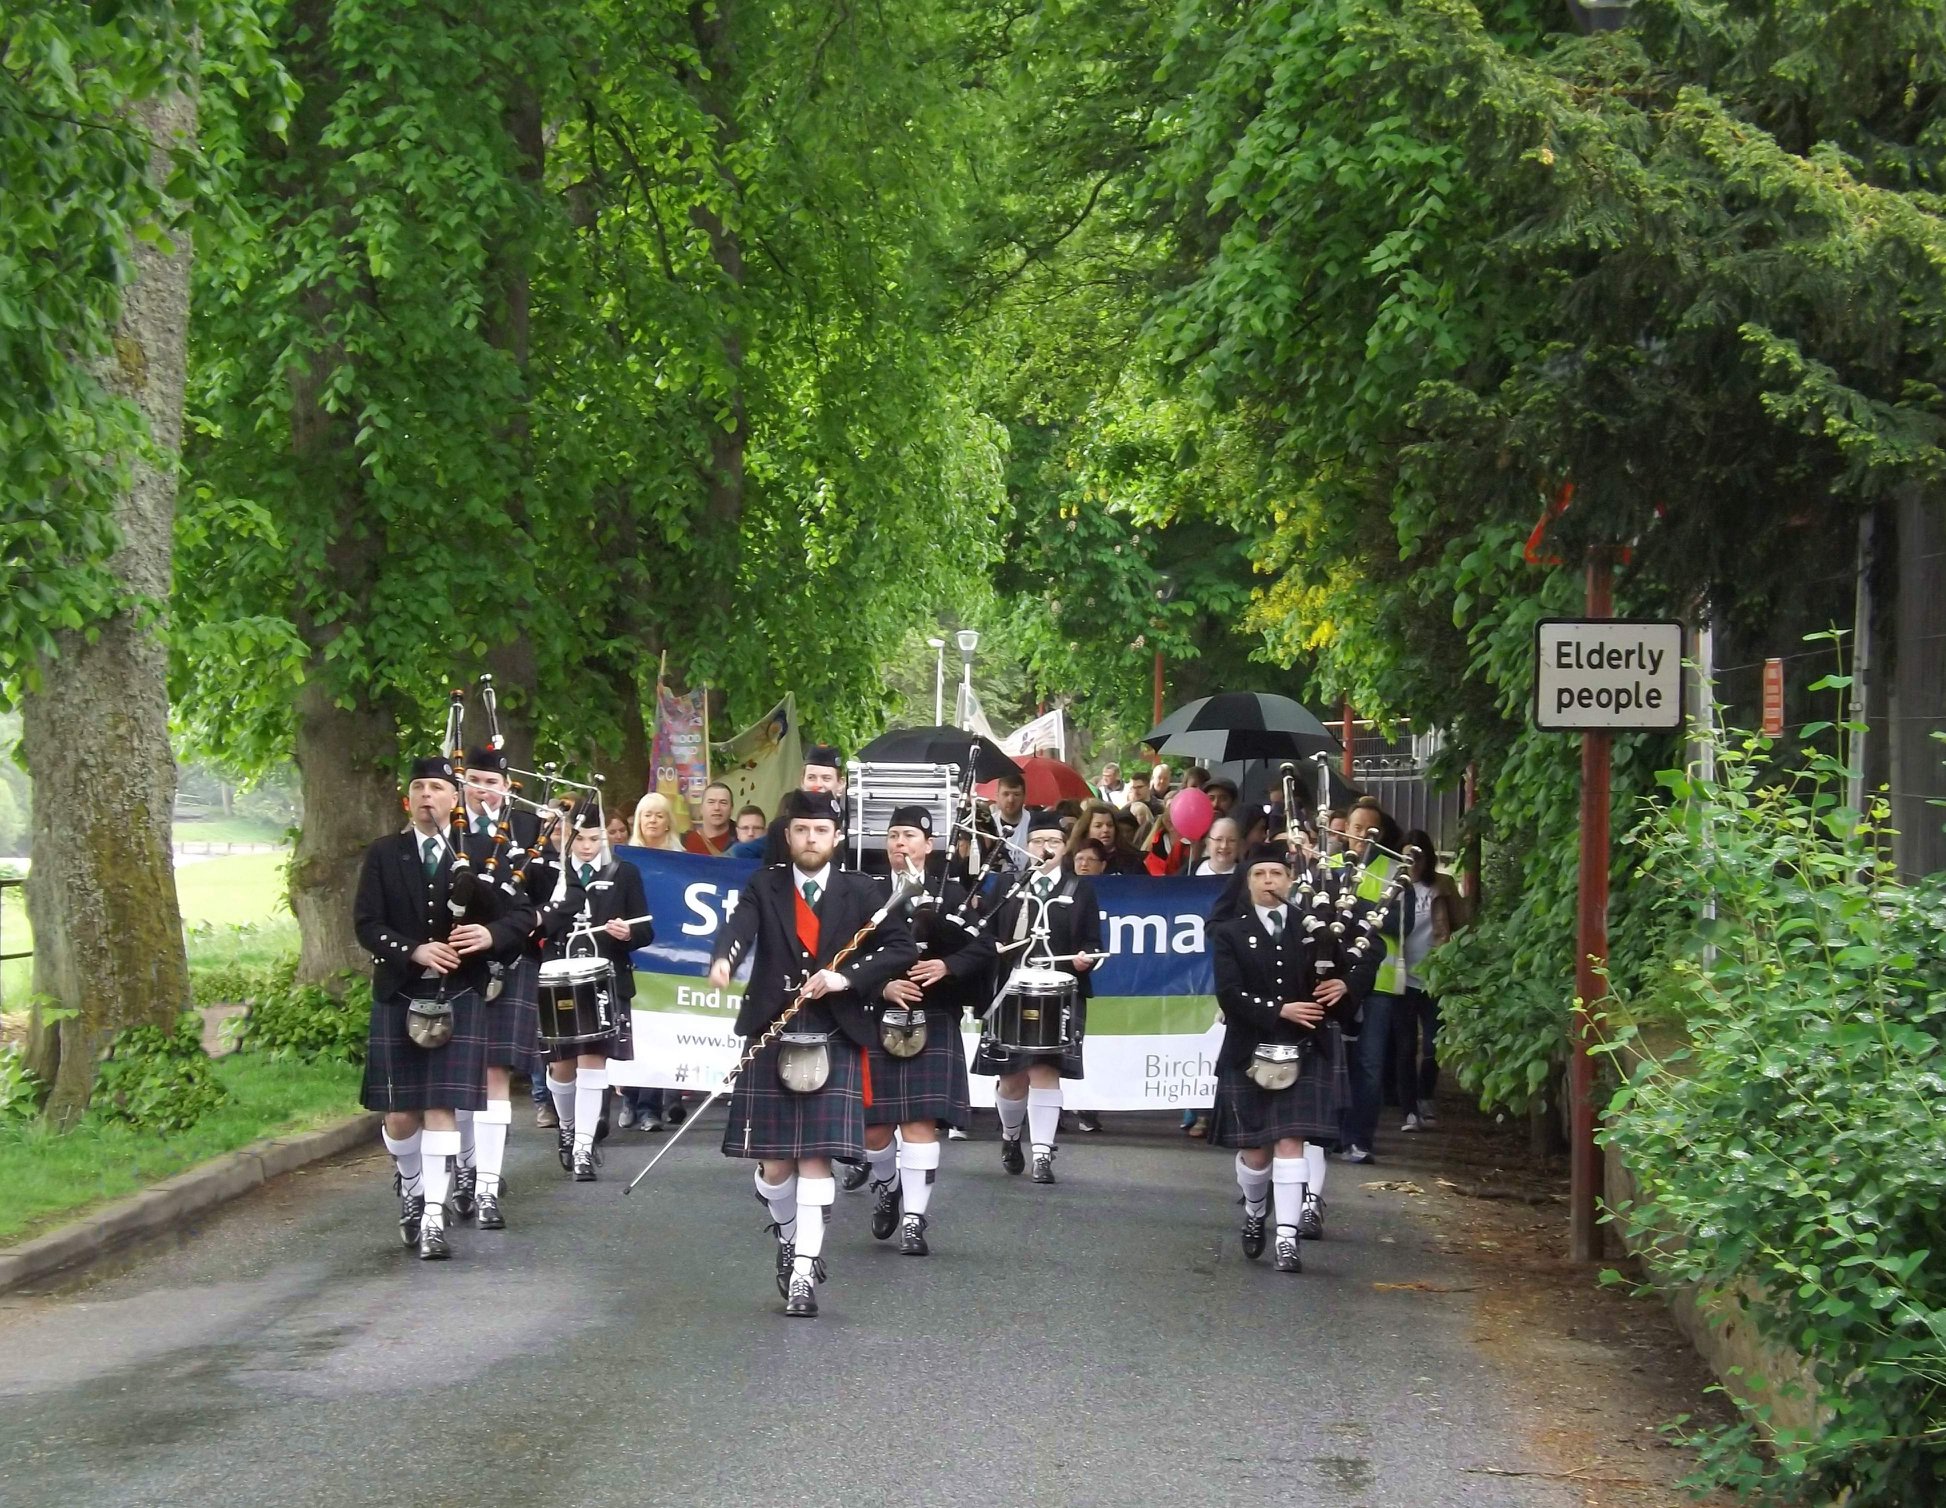 March to raise awareness of mental health issues was led by Northern Constabulary Community Pipe Band. credit Dave Conner